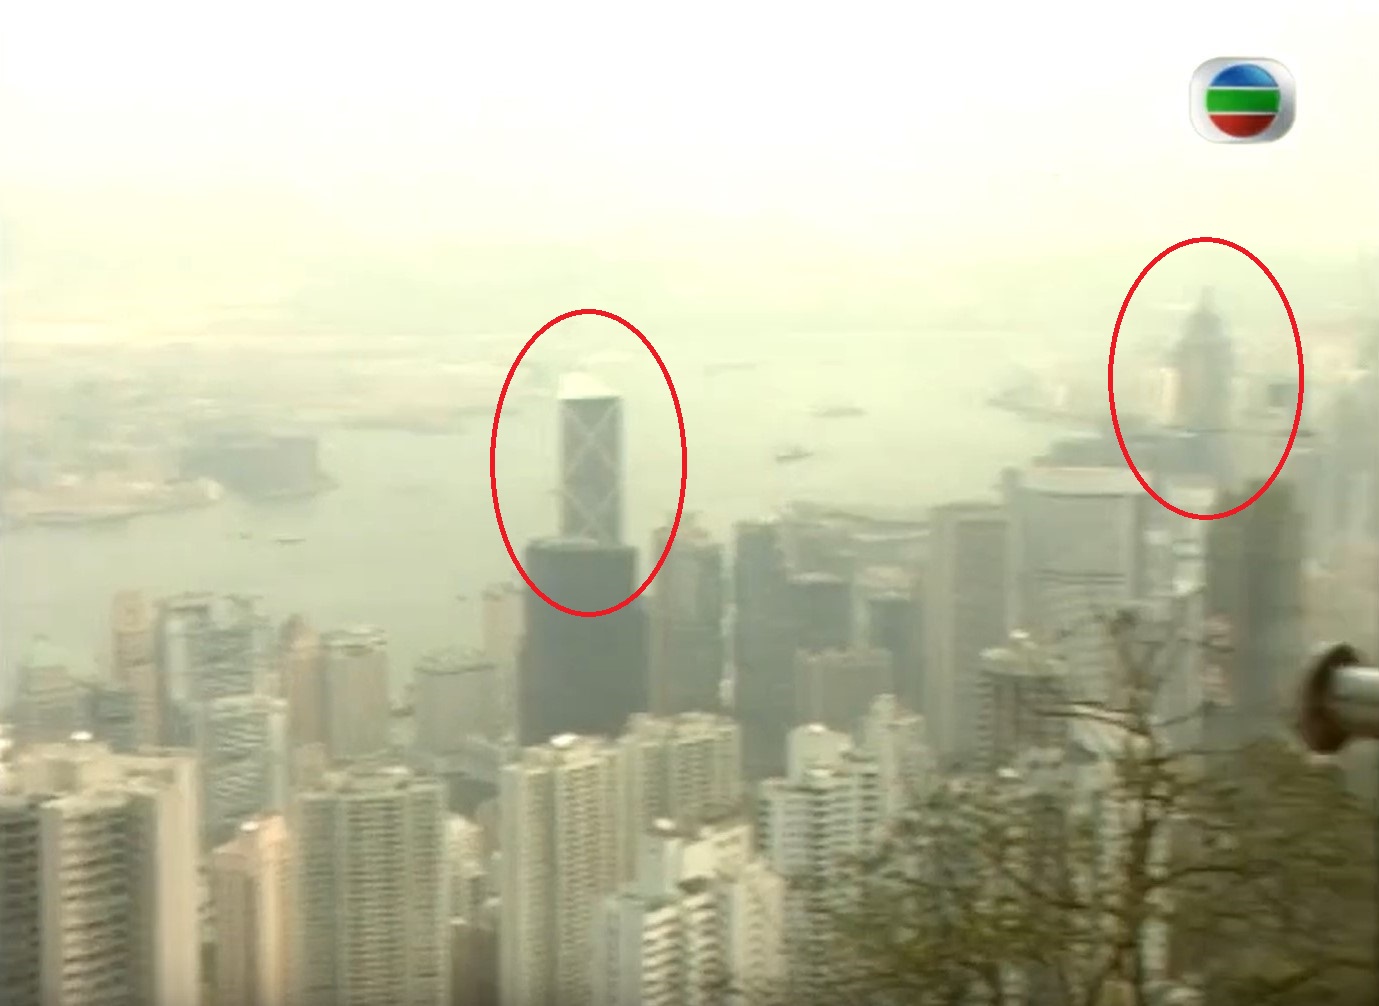 Screenshot of soap opera show Bank of China Tower and Central Plaza.